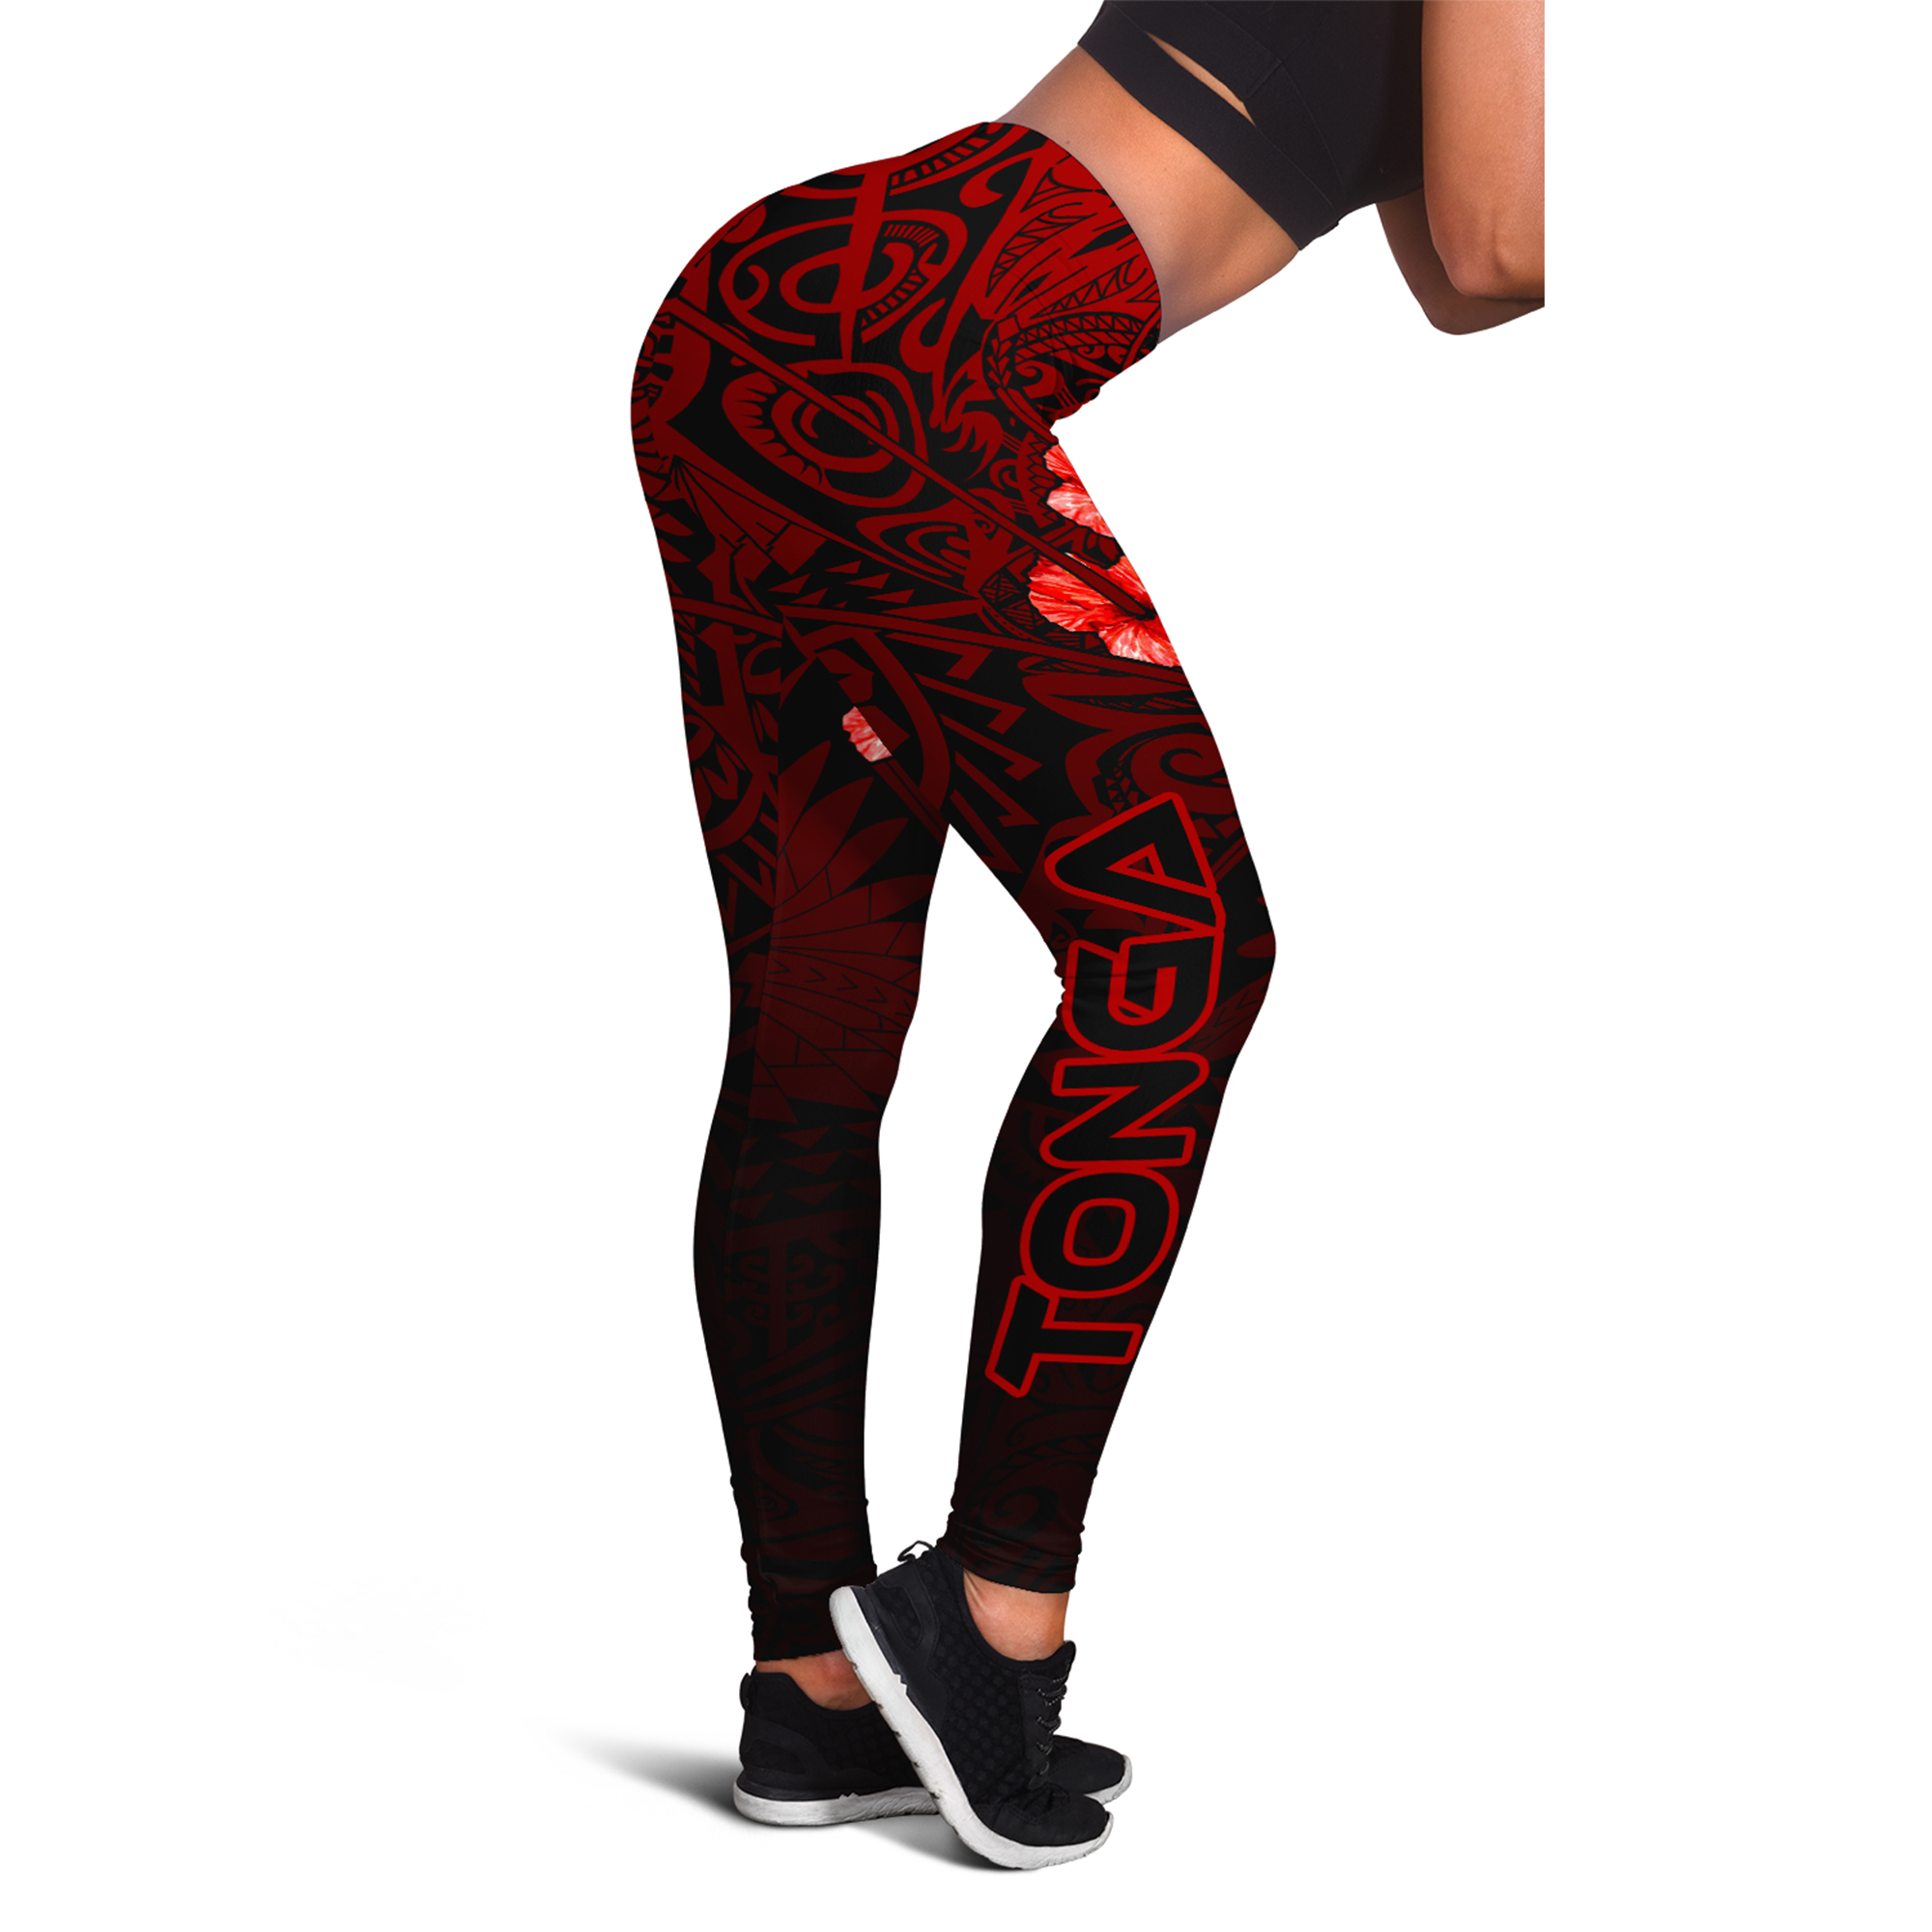 Tonga Women's Leggings - Hibiscus Flowers Red Color Style Red - Polynesian Pride